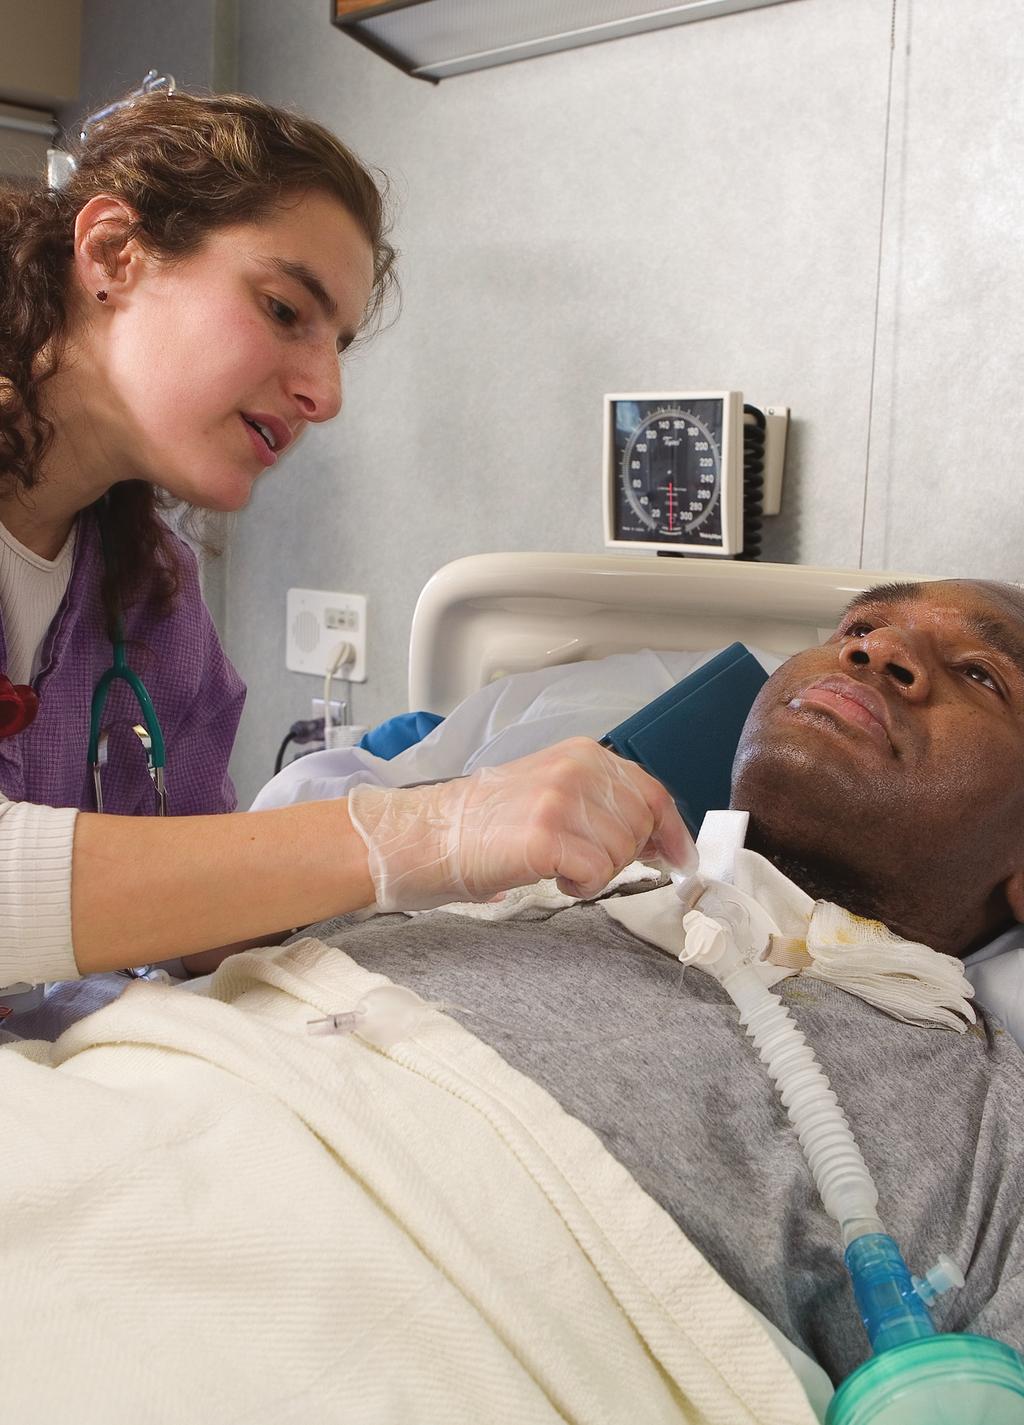 Ventilator Liberation: An Innovative, Interdisciplinary Model for Patient Care Bethesda Hospital, Member, HealthEast Care System Previously strong ventilator weaning rates plateaued in the winter